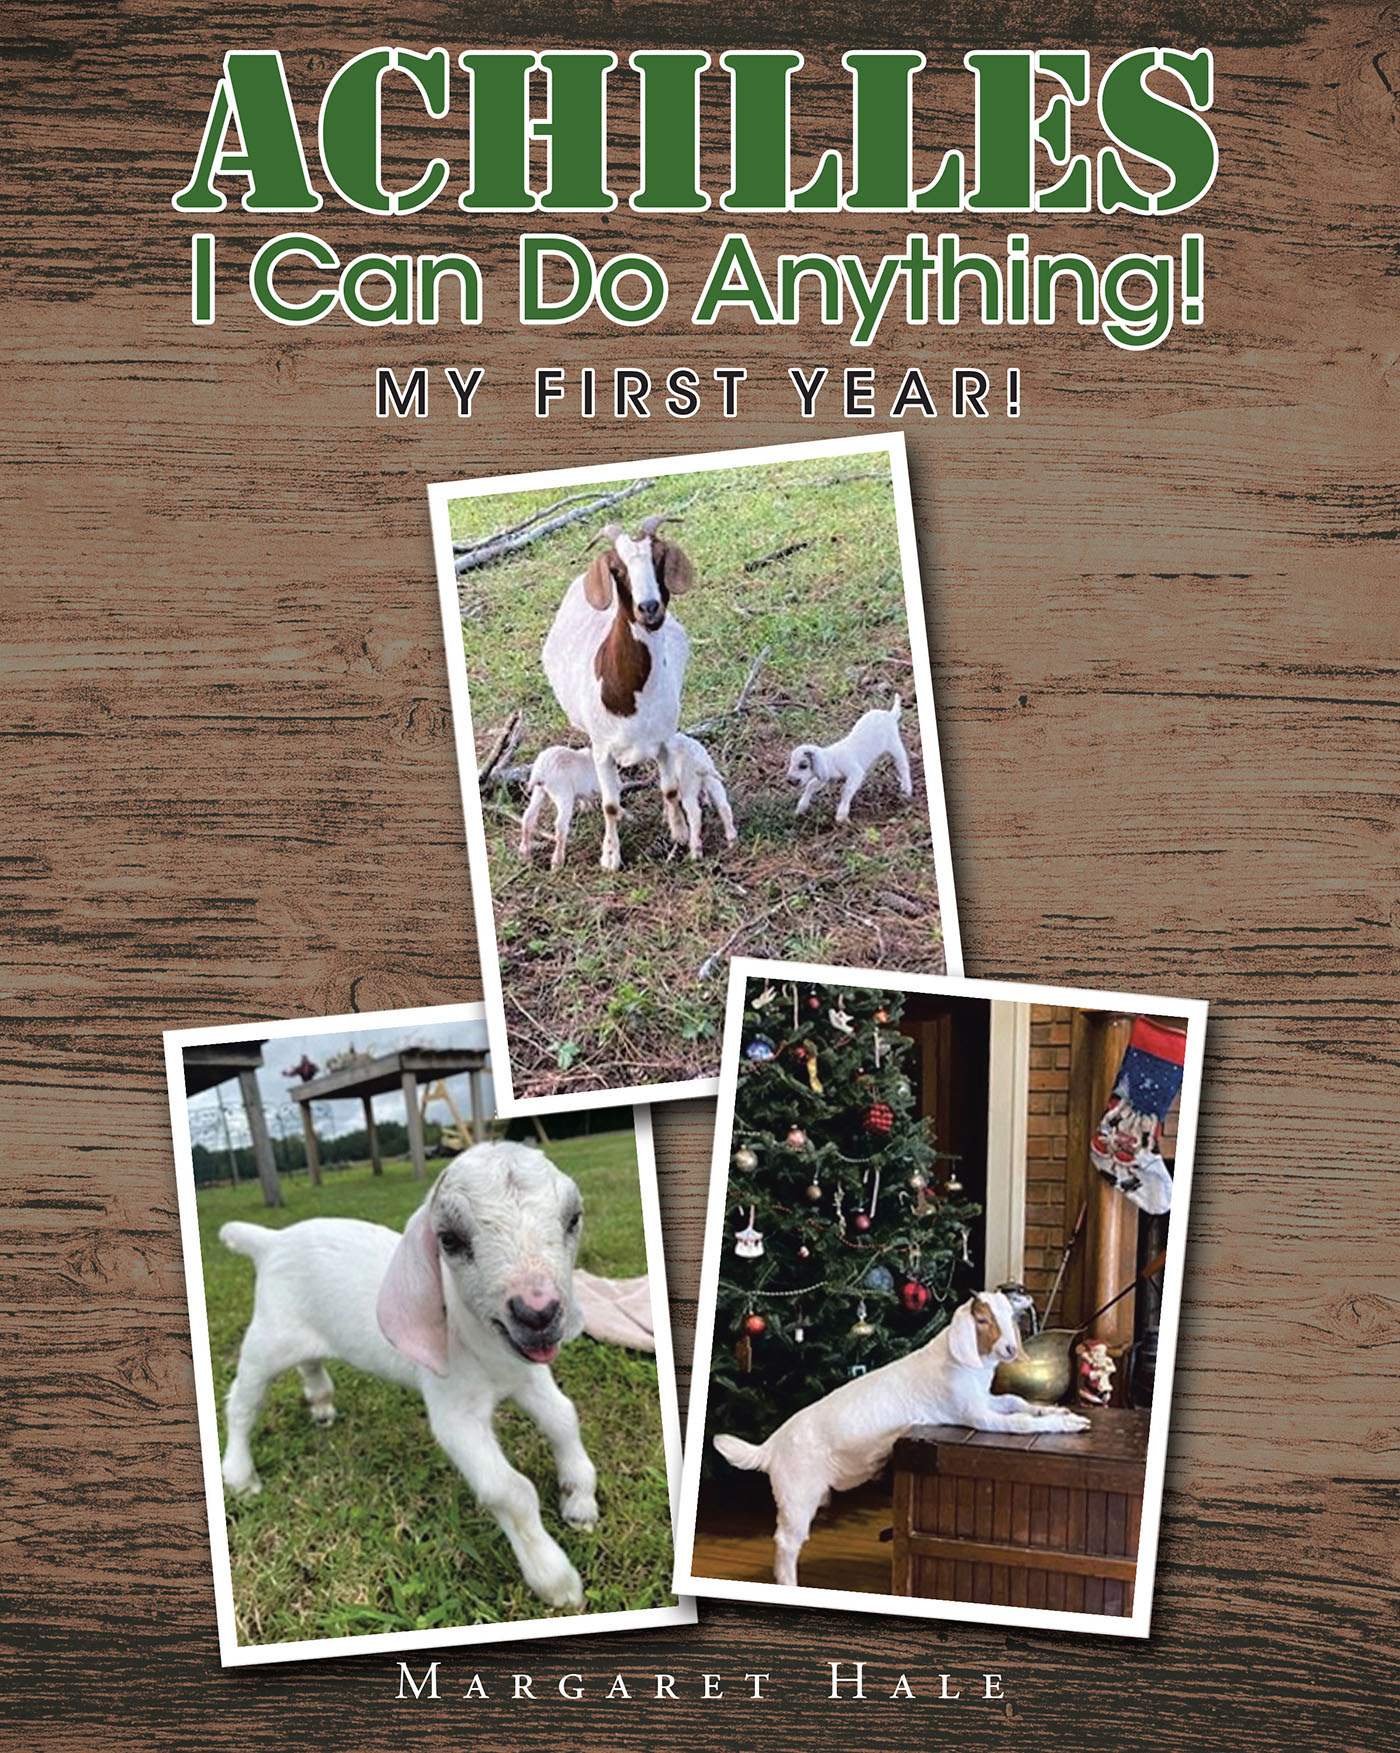 Margaret Hale’s Newly Released "Achilles I Can Do Anything!: My First Year!" is a Sweet Story of a Special Goat with a Big Lesson to Share